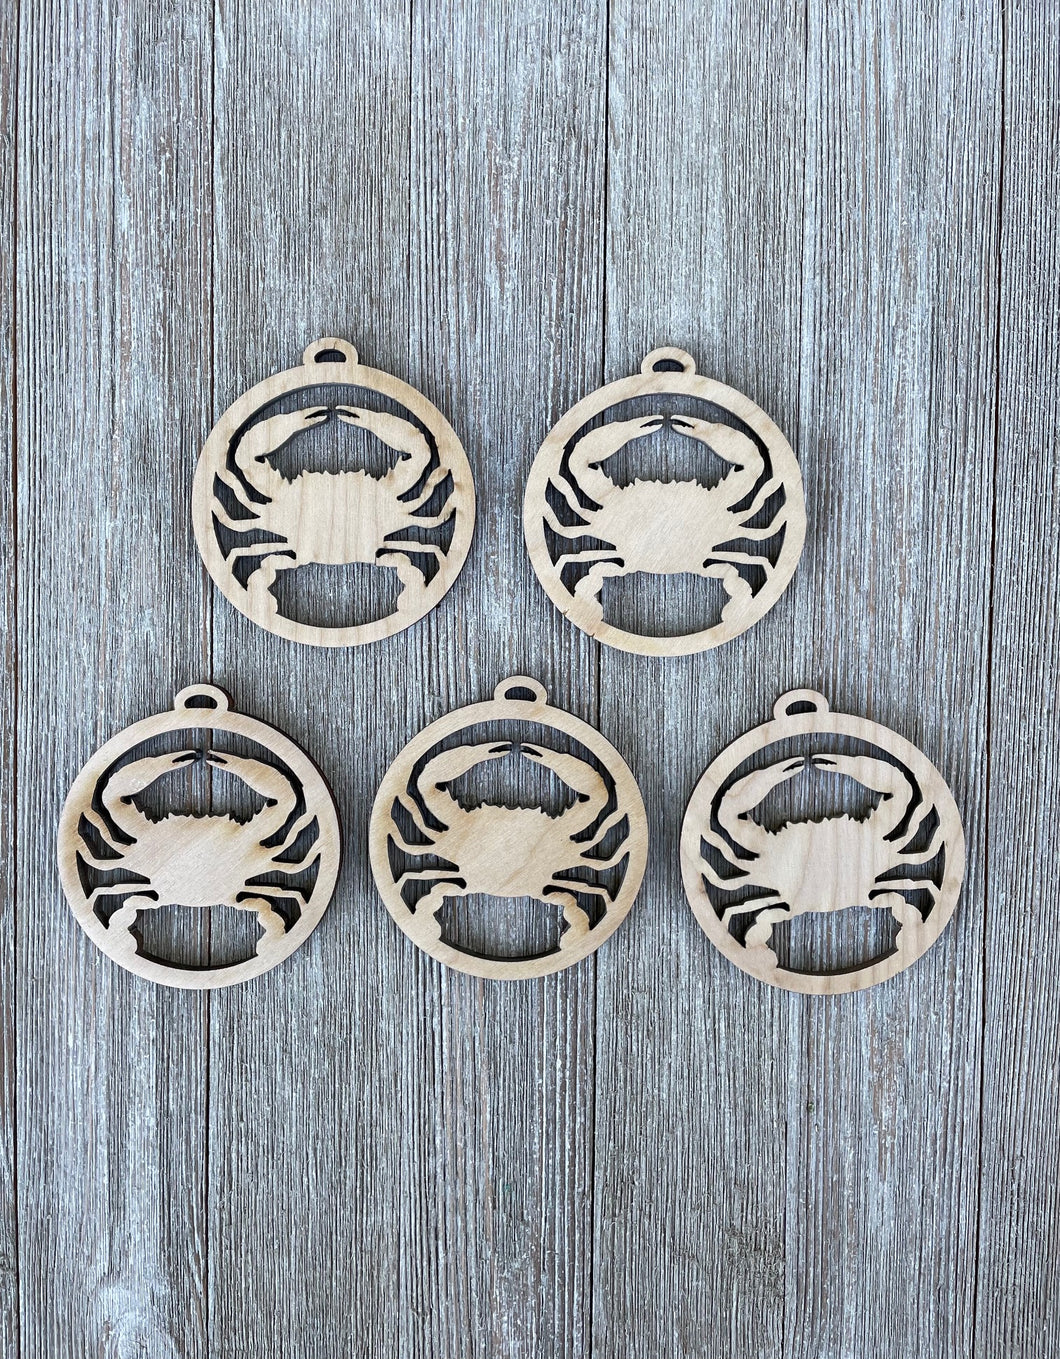 Wooden Crab Cut Outs - Set of 5